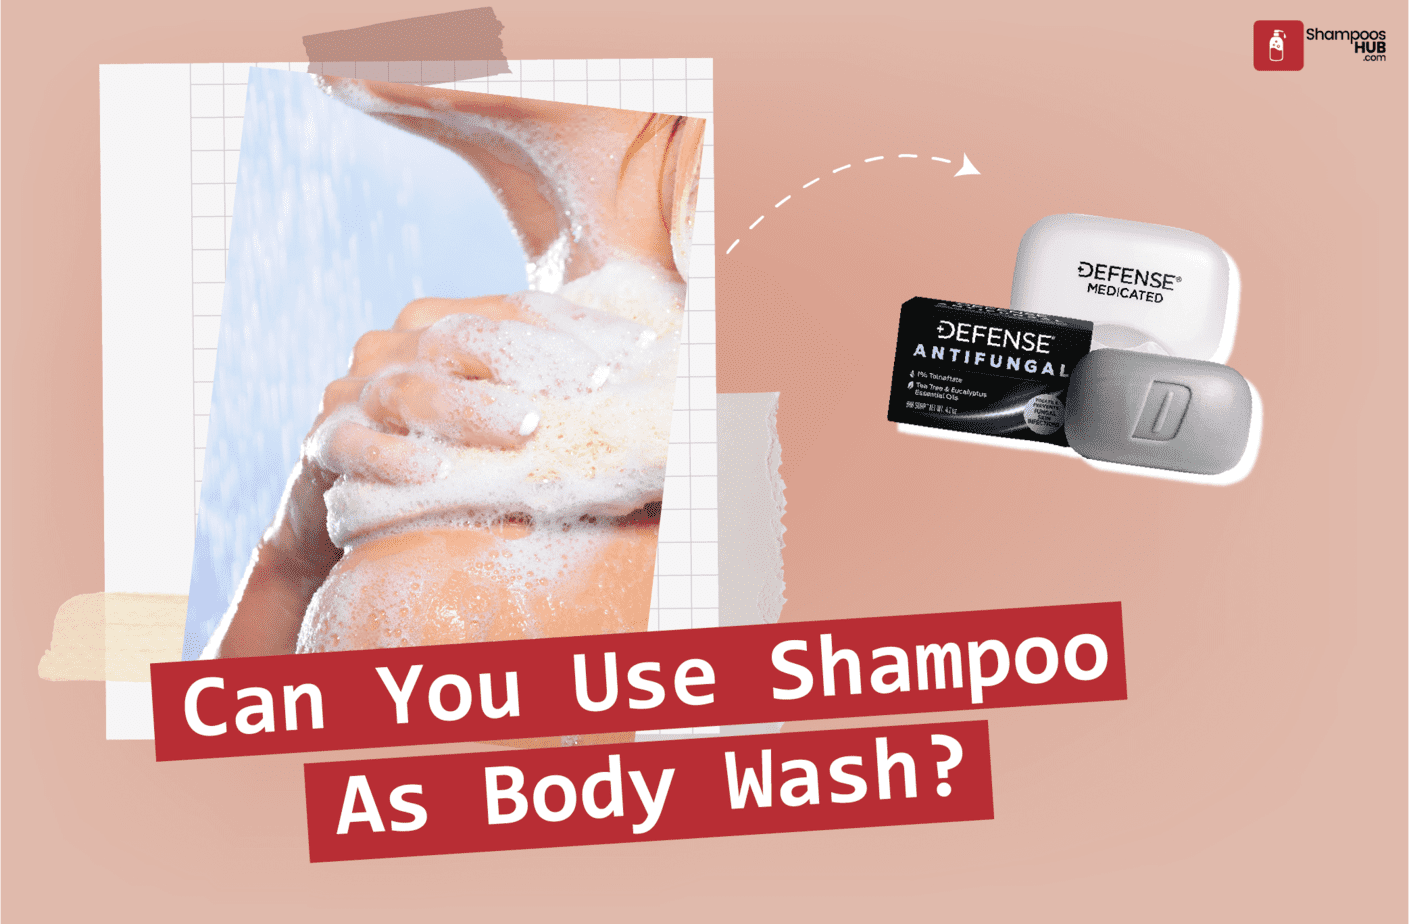 Can You Use Shampoo As Body Wash?